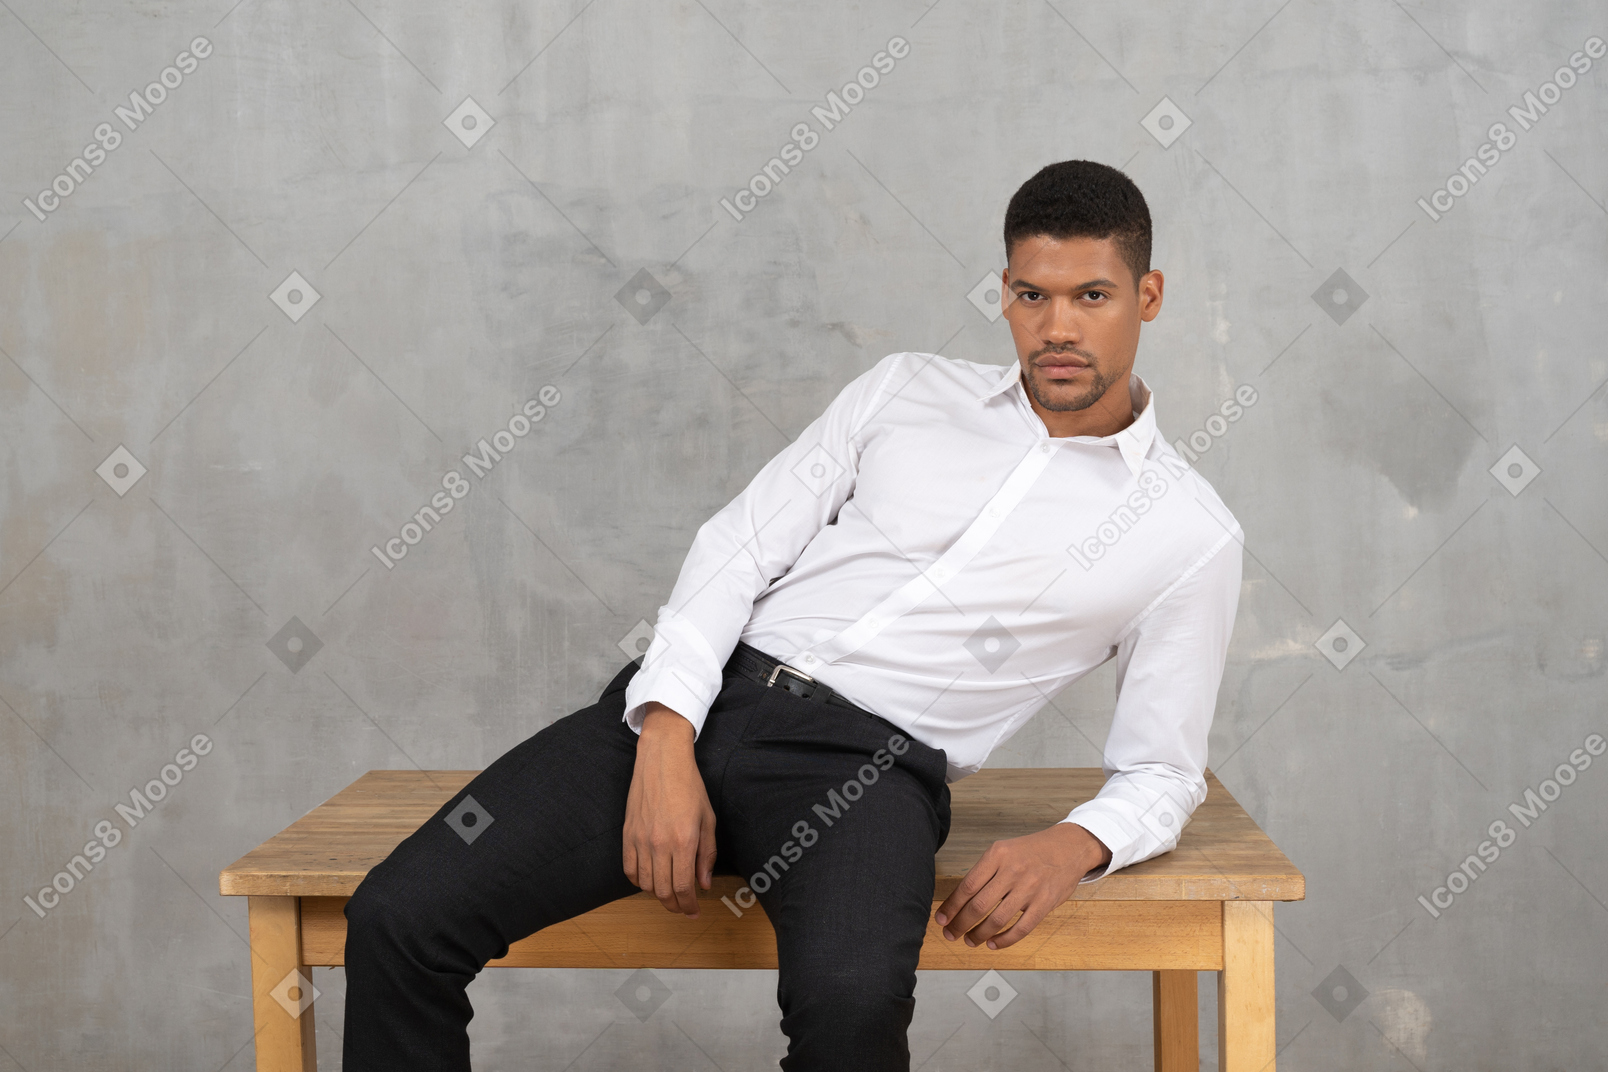 Relaxed man in office clothes sitting on a table